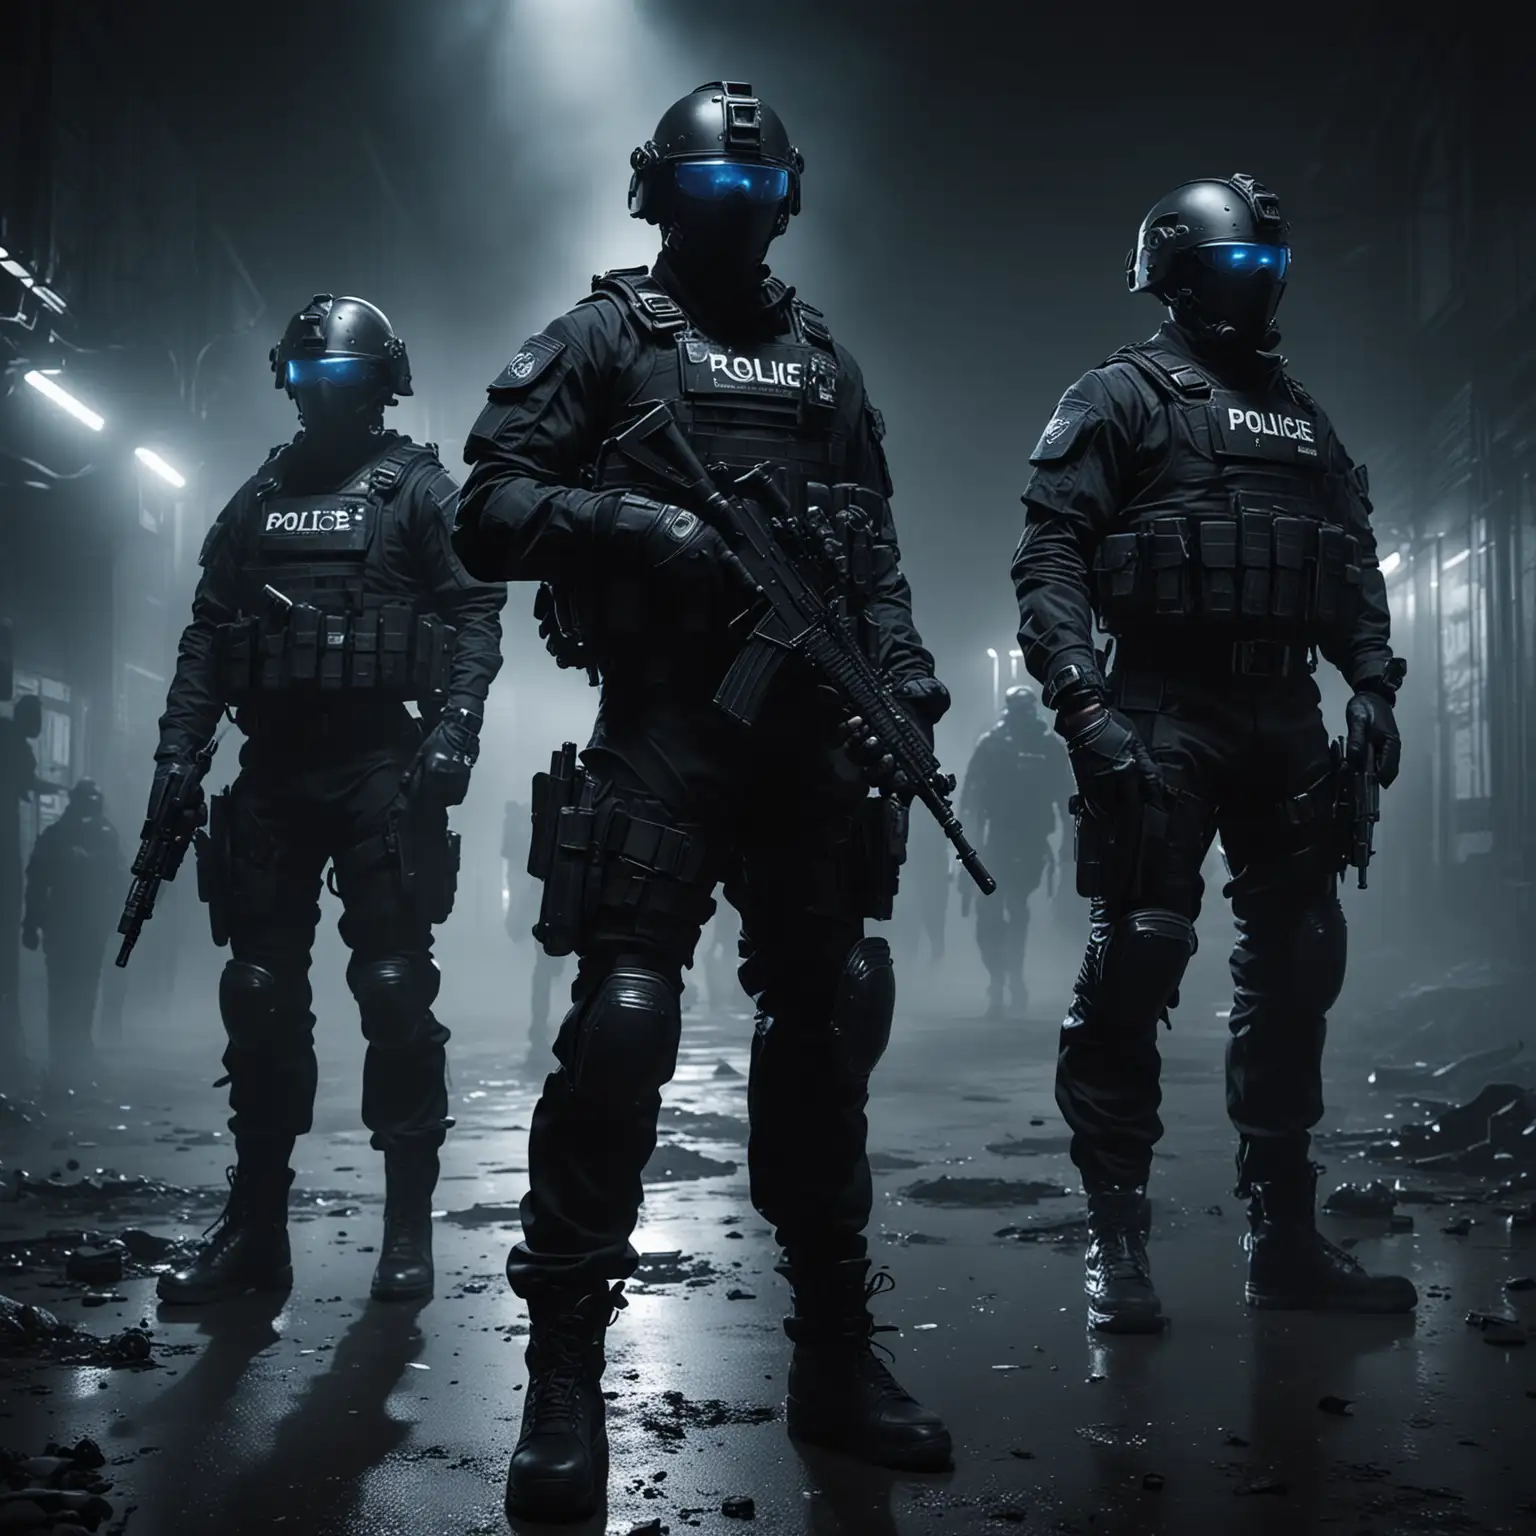 Futuristic Police Squad in Tactical Gear at Night